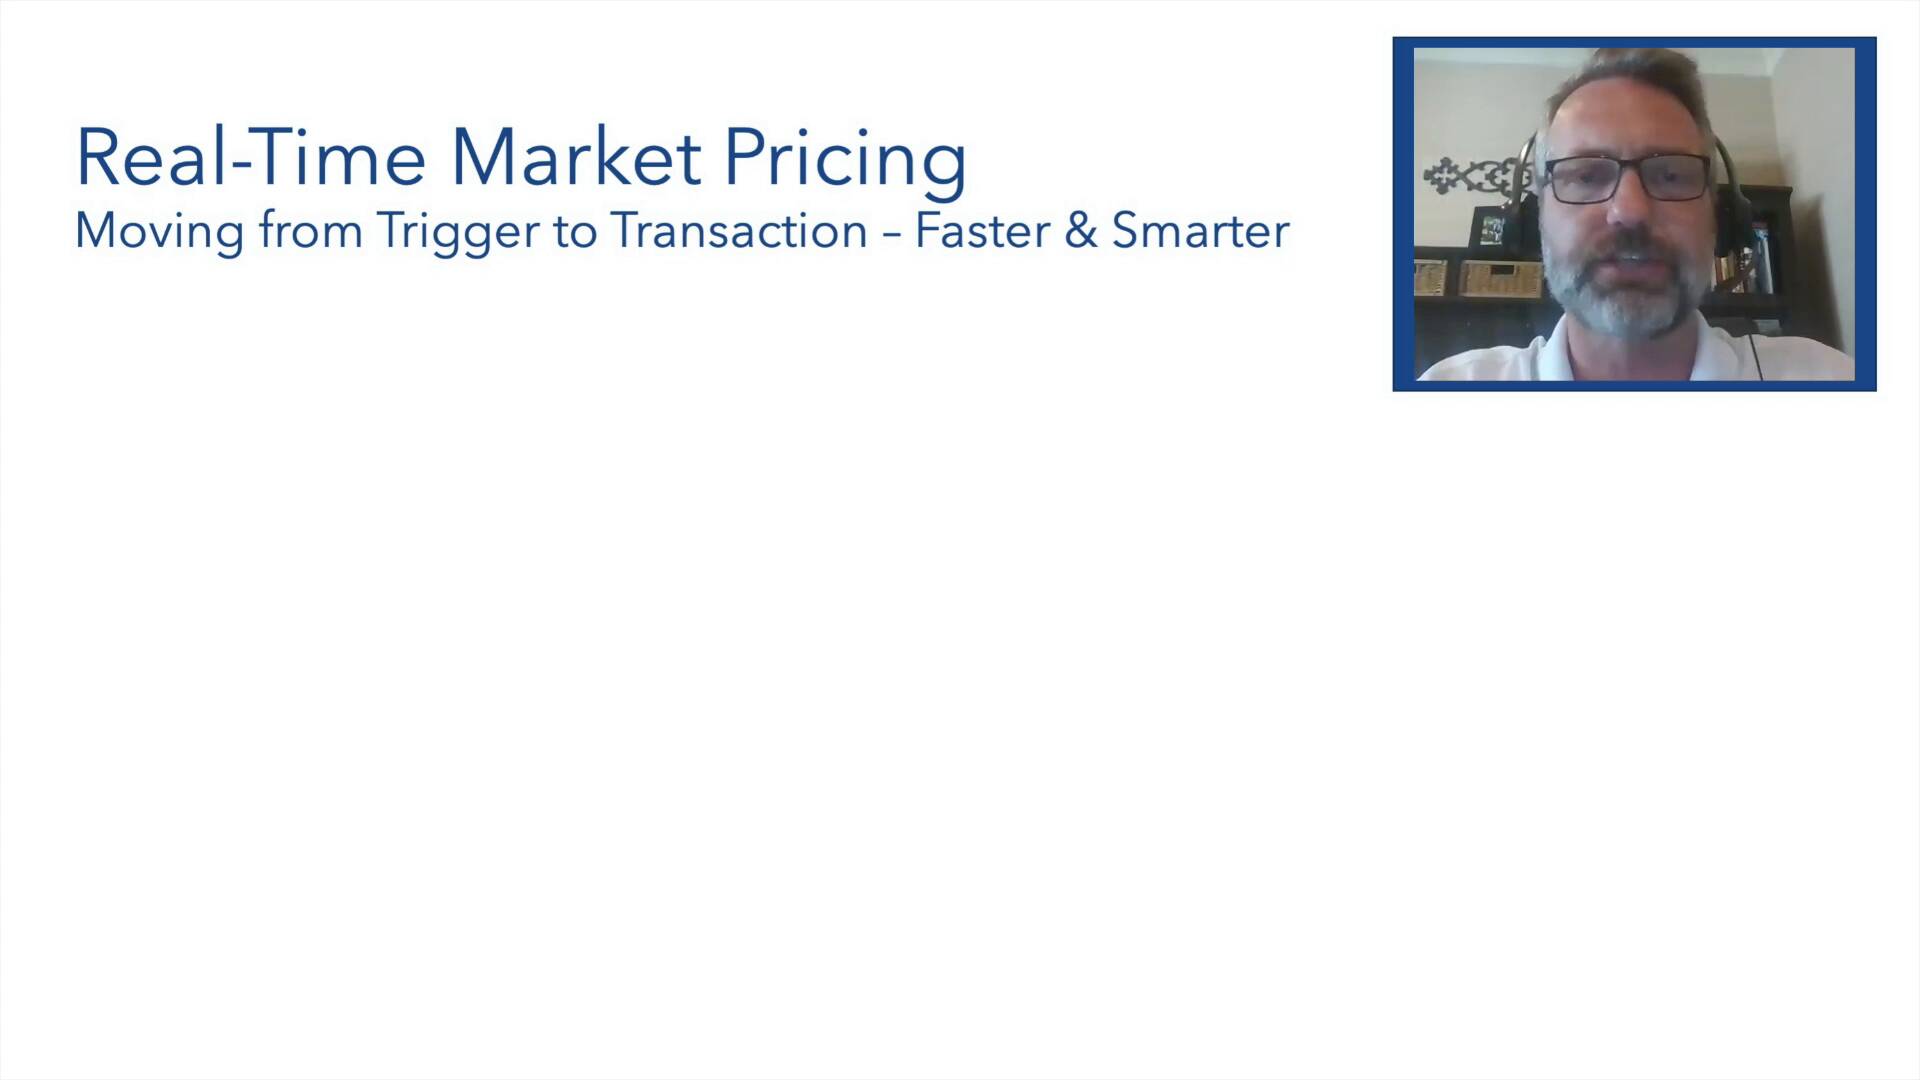 MDM Spotlight Video: Real-Time Market Pricing for eCommerce Distribution